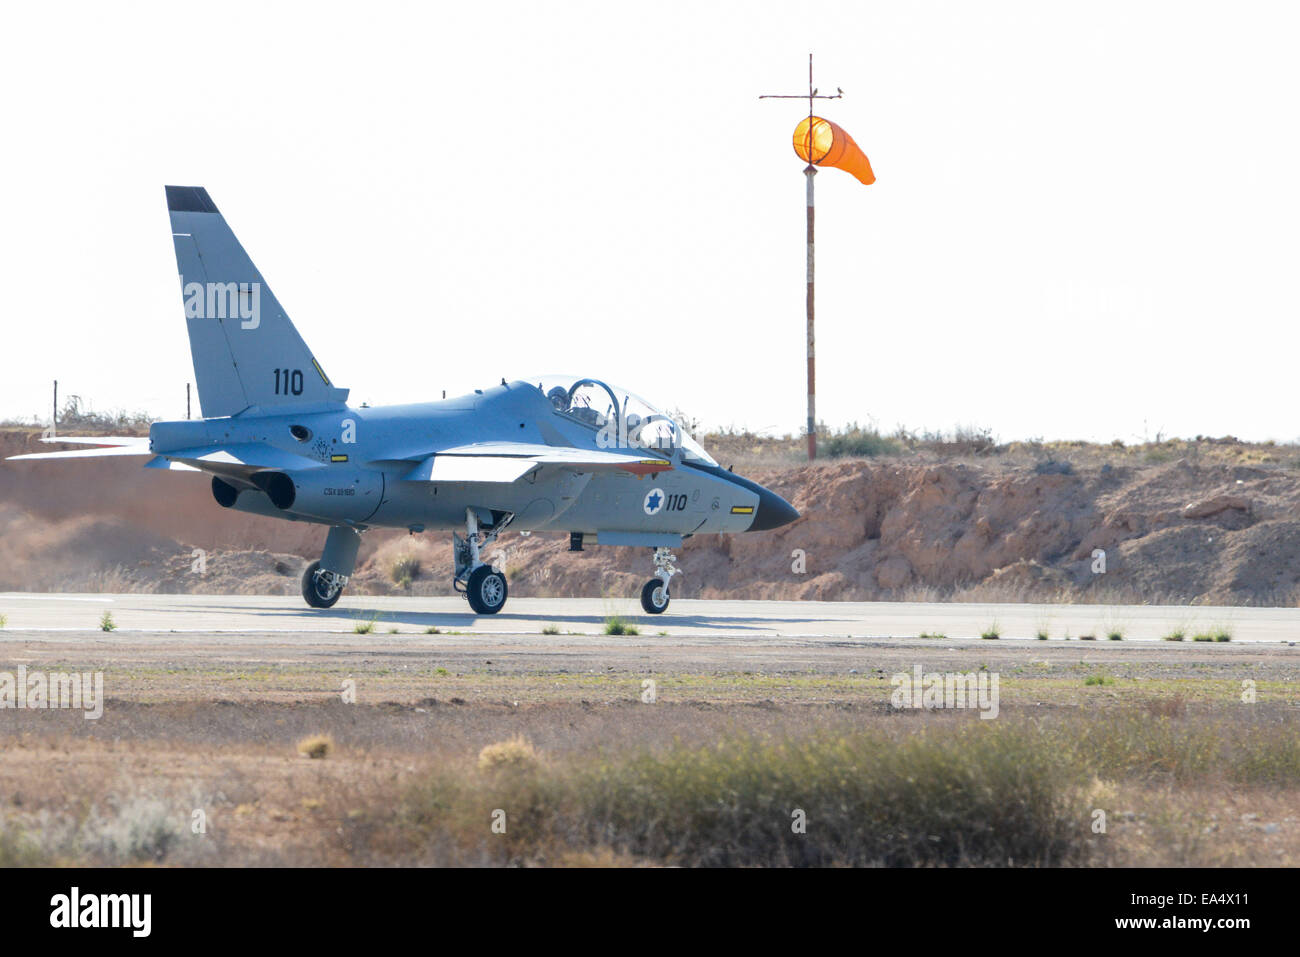 Jerusalem, Israel. 6th Nov, 2014. The Israeli Air Force new Lavi training aircraft is seen during a training flight at Hatzerim Air Base, southern Israel, on Nov. 6, 2014. The Israeli Air Force announced in July 2013 that the Alenia Aermacchi M-346 Master, an advanced trainer aircraft under procurement, would receive the name Lavi in Israeli service. A total of thirty M-346s are to be operated from 2014. © JINI/Xinhua/Alamy Live News Stock Photo